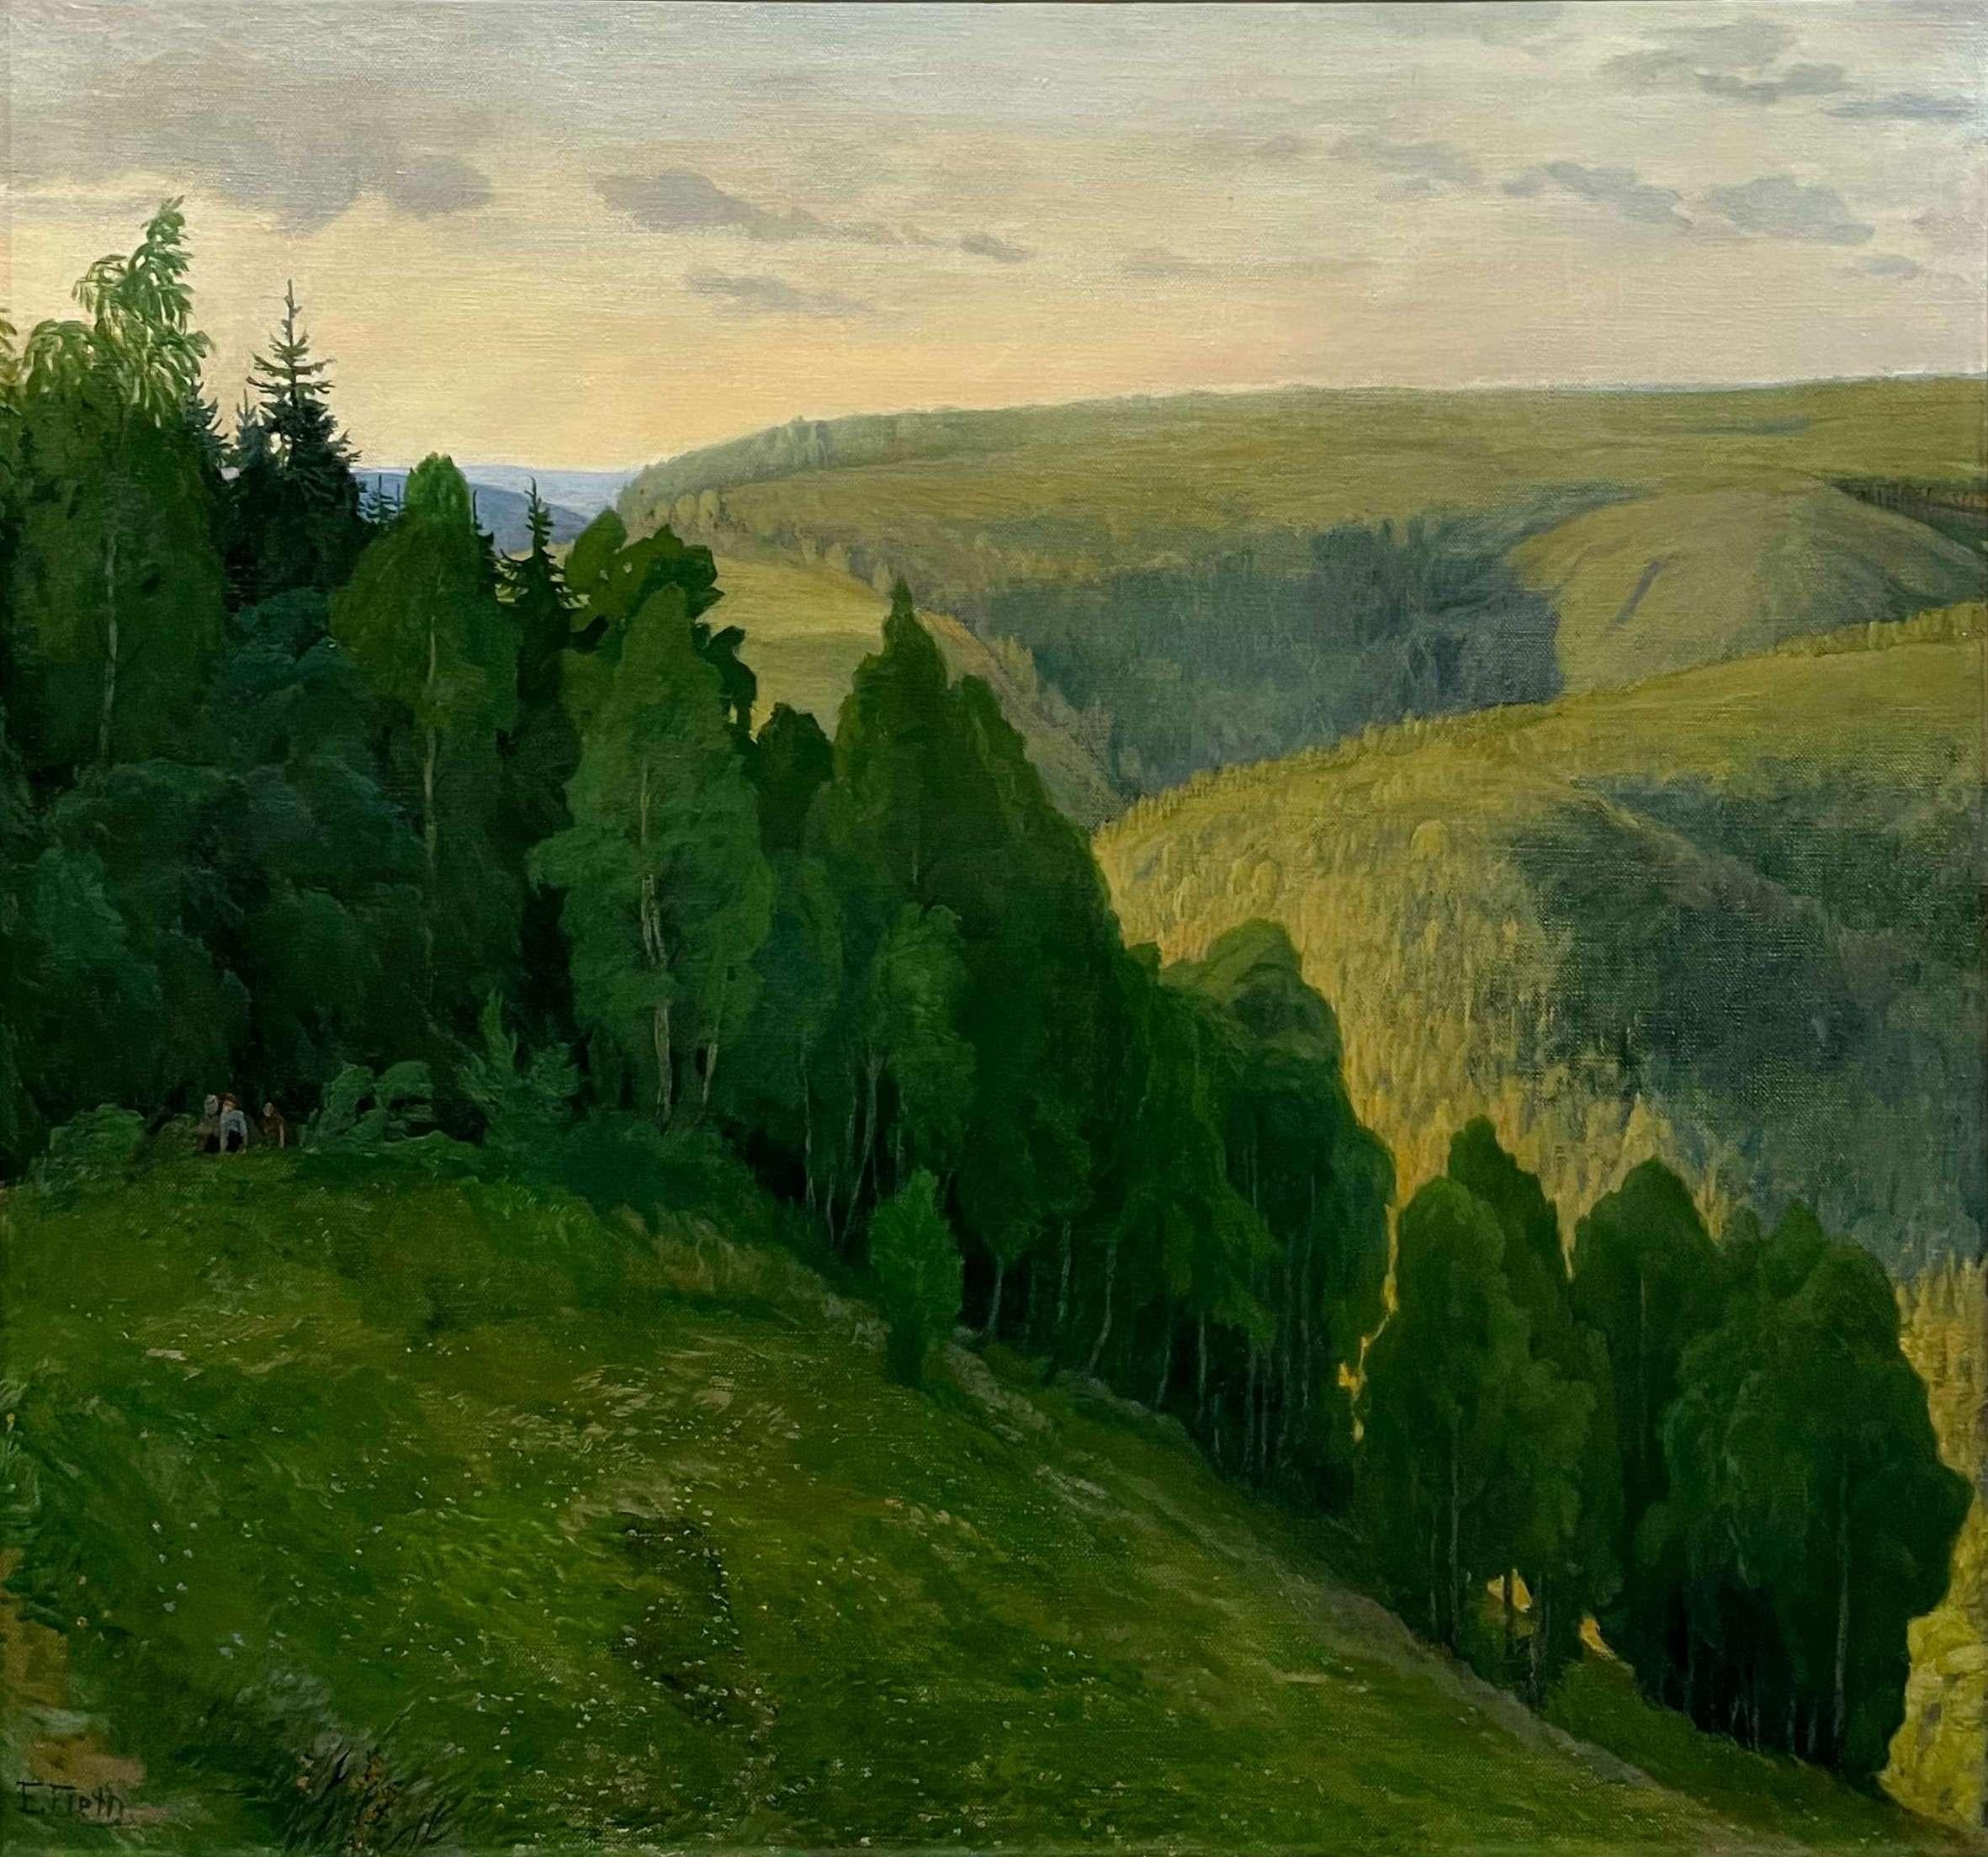 Unknown Landscape Painting - A Beautiful European Landscape/Mountainscape by artist European Artist E. Feith